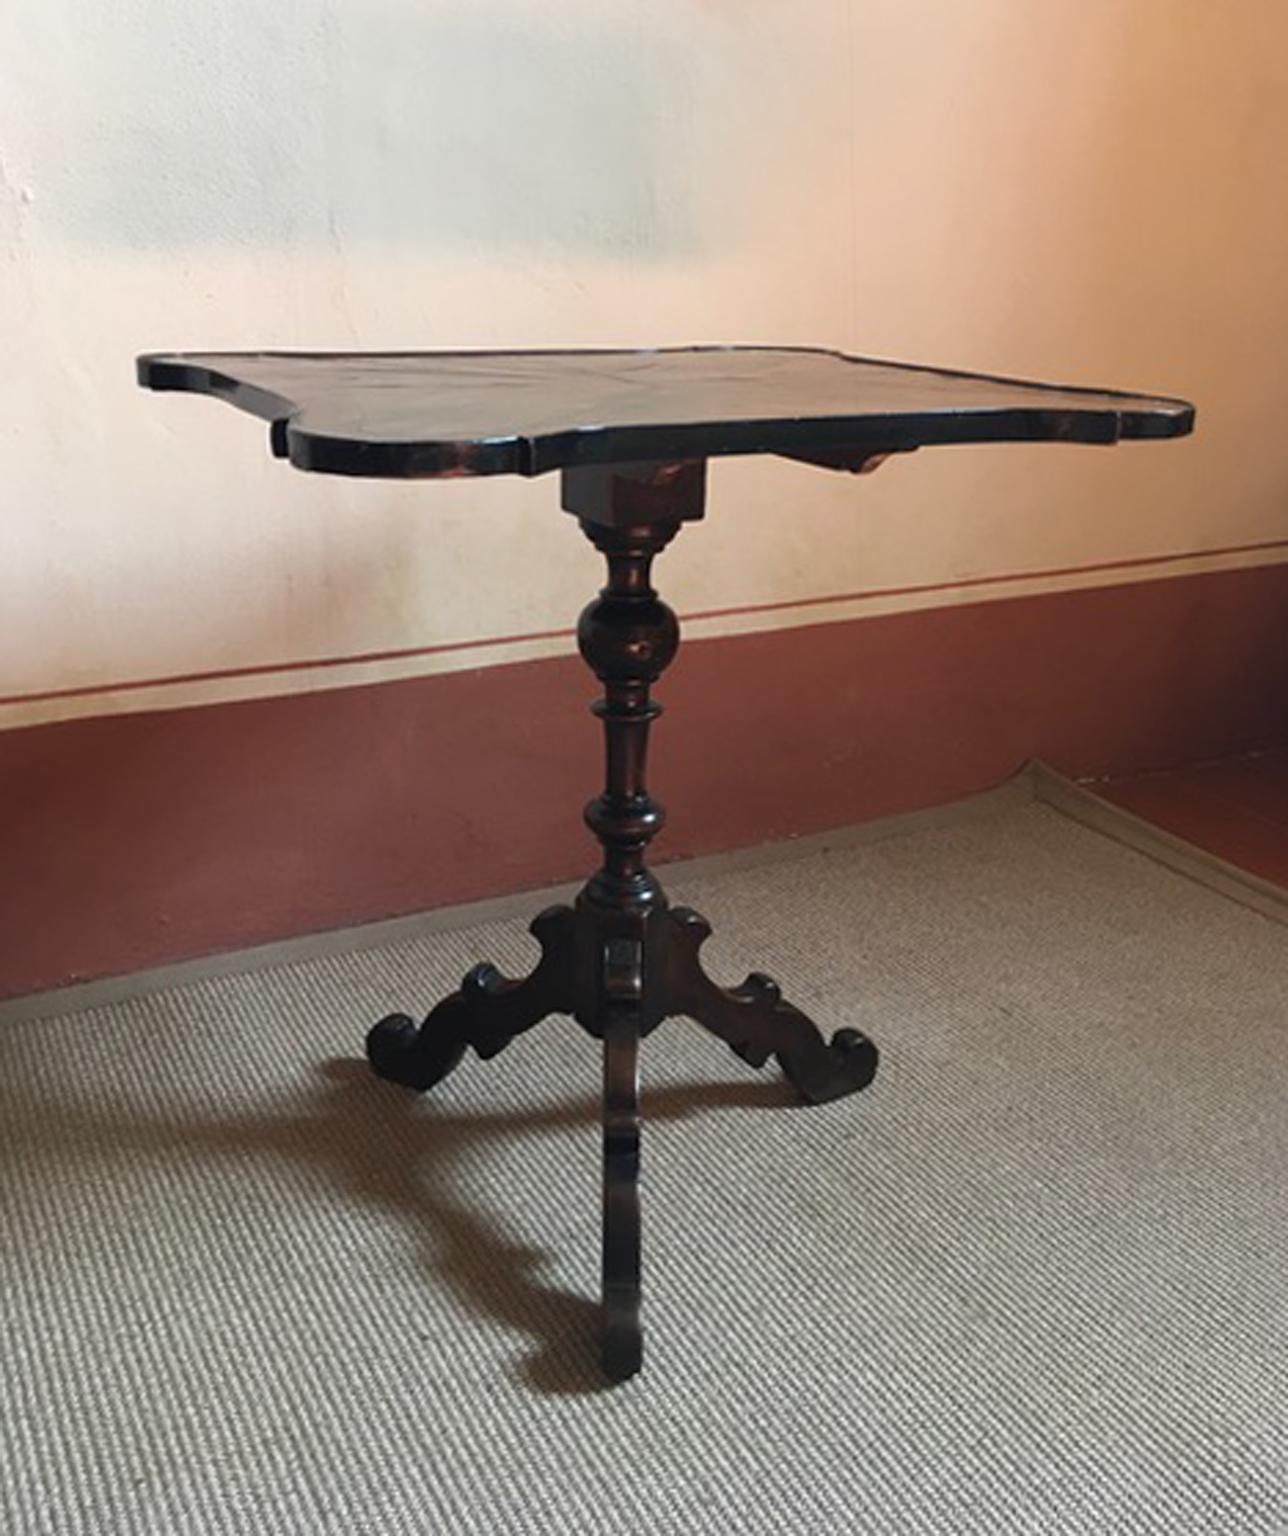 Elegance, charming, beauty, are the adjectives to attribute to this tea table or side table, handmade in the Northern part of Italy, Lombardia, in the Early 19th Century. The walnut solid foot has again traces of black ebonized lacquer. The piece